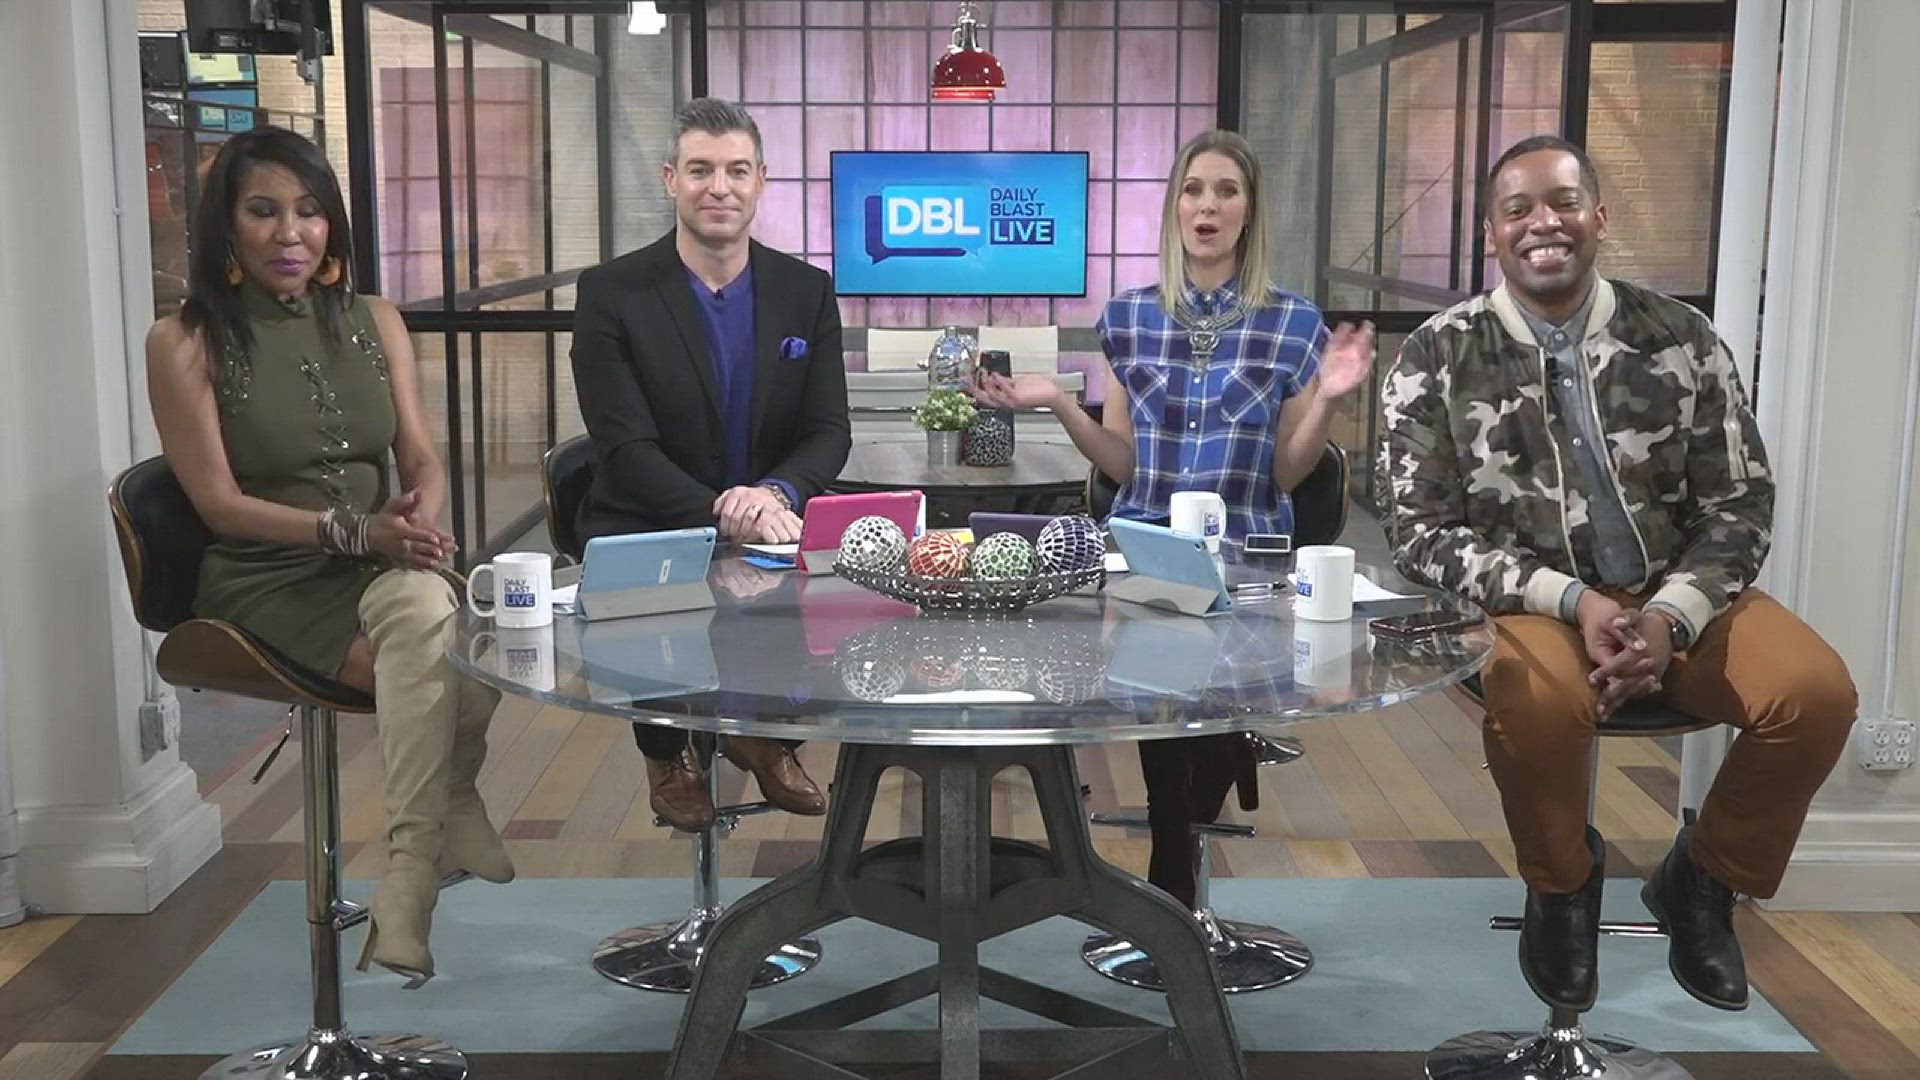 Which wedding traditions would you get rid of? Head to our social media @DailyBlastLIVE to let us know!